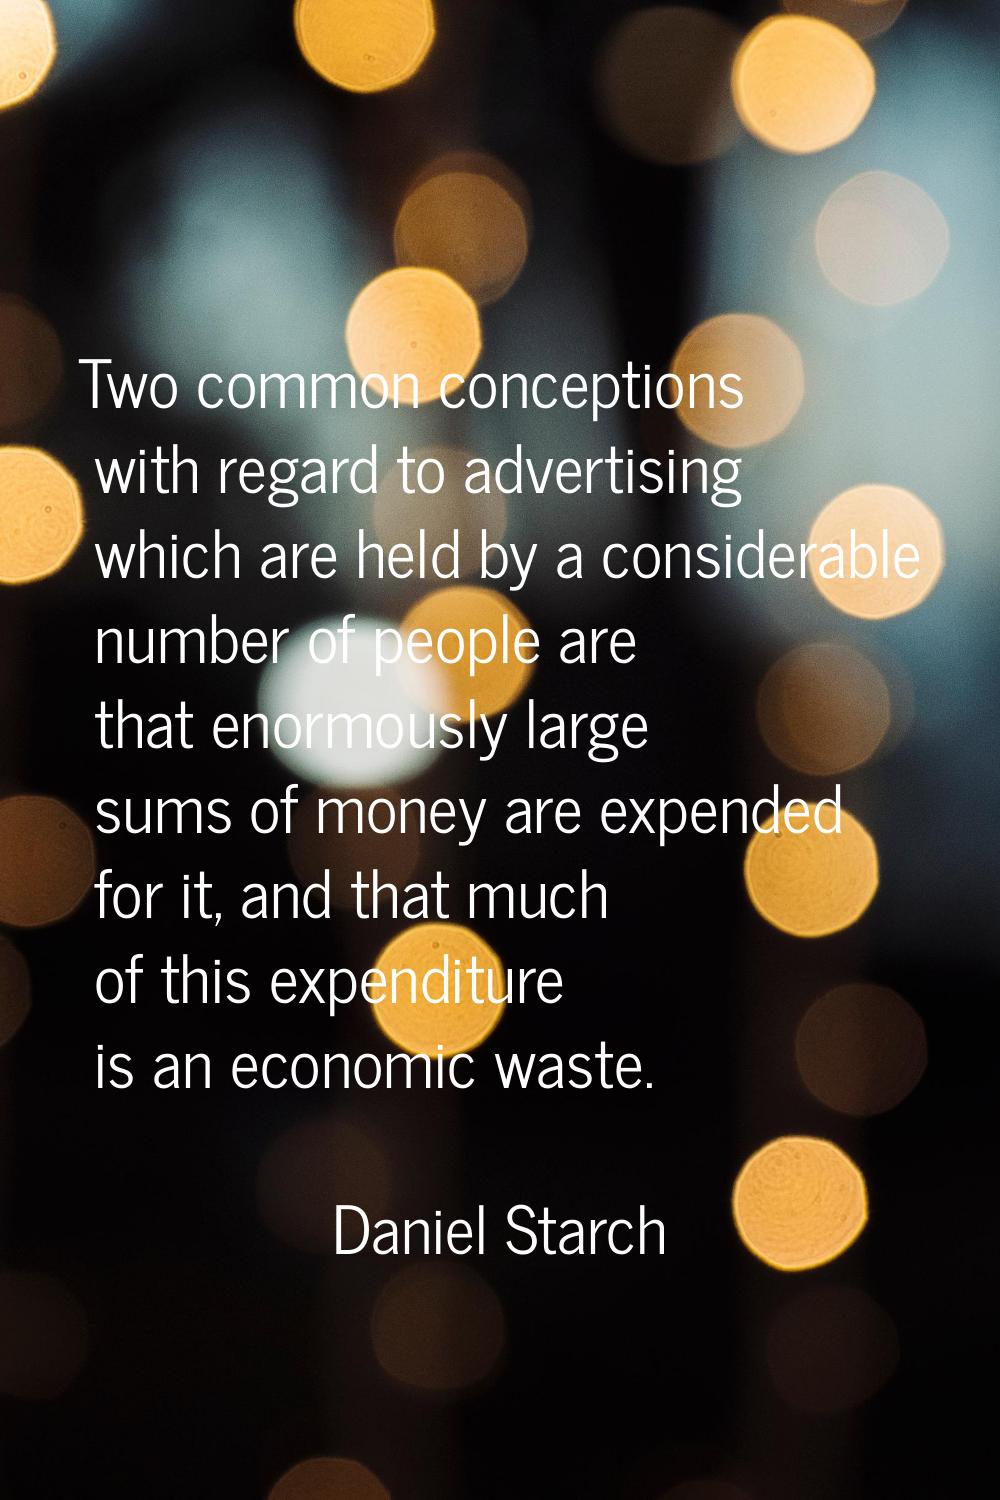 Two common conceptions with regard to advertising which are held by a considerable number of people